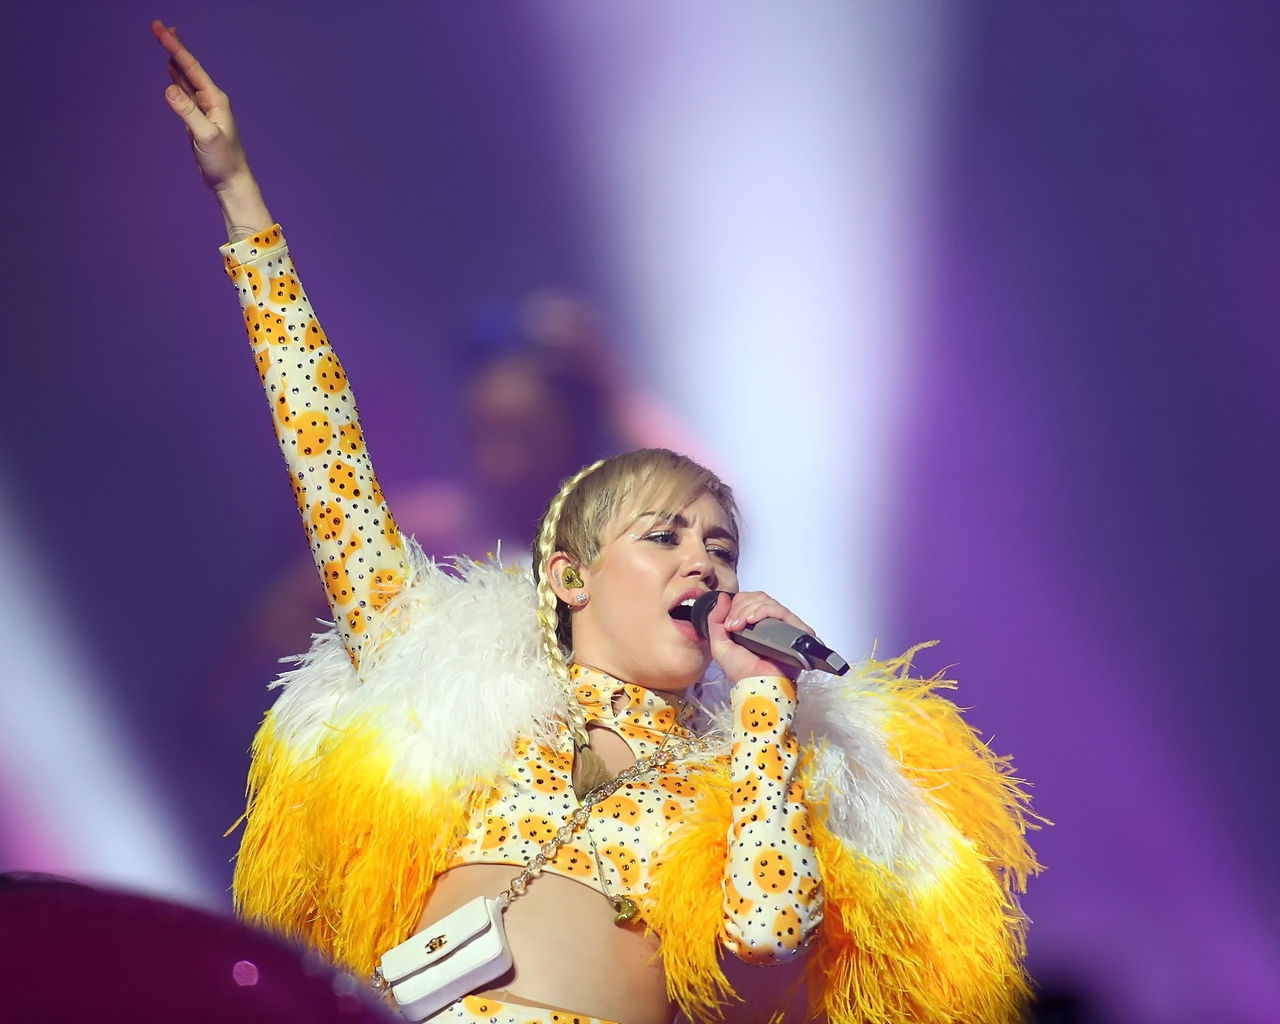 Miley Cyrus Live Performance for 1280 x 1024 resolution